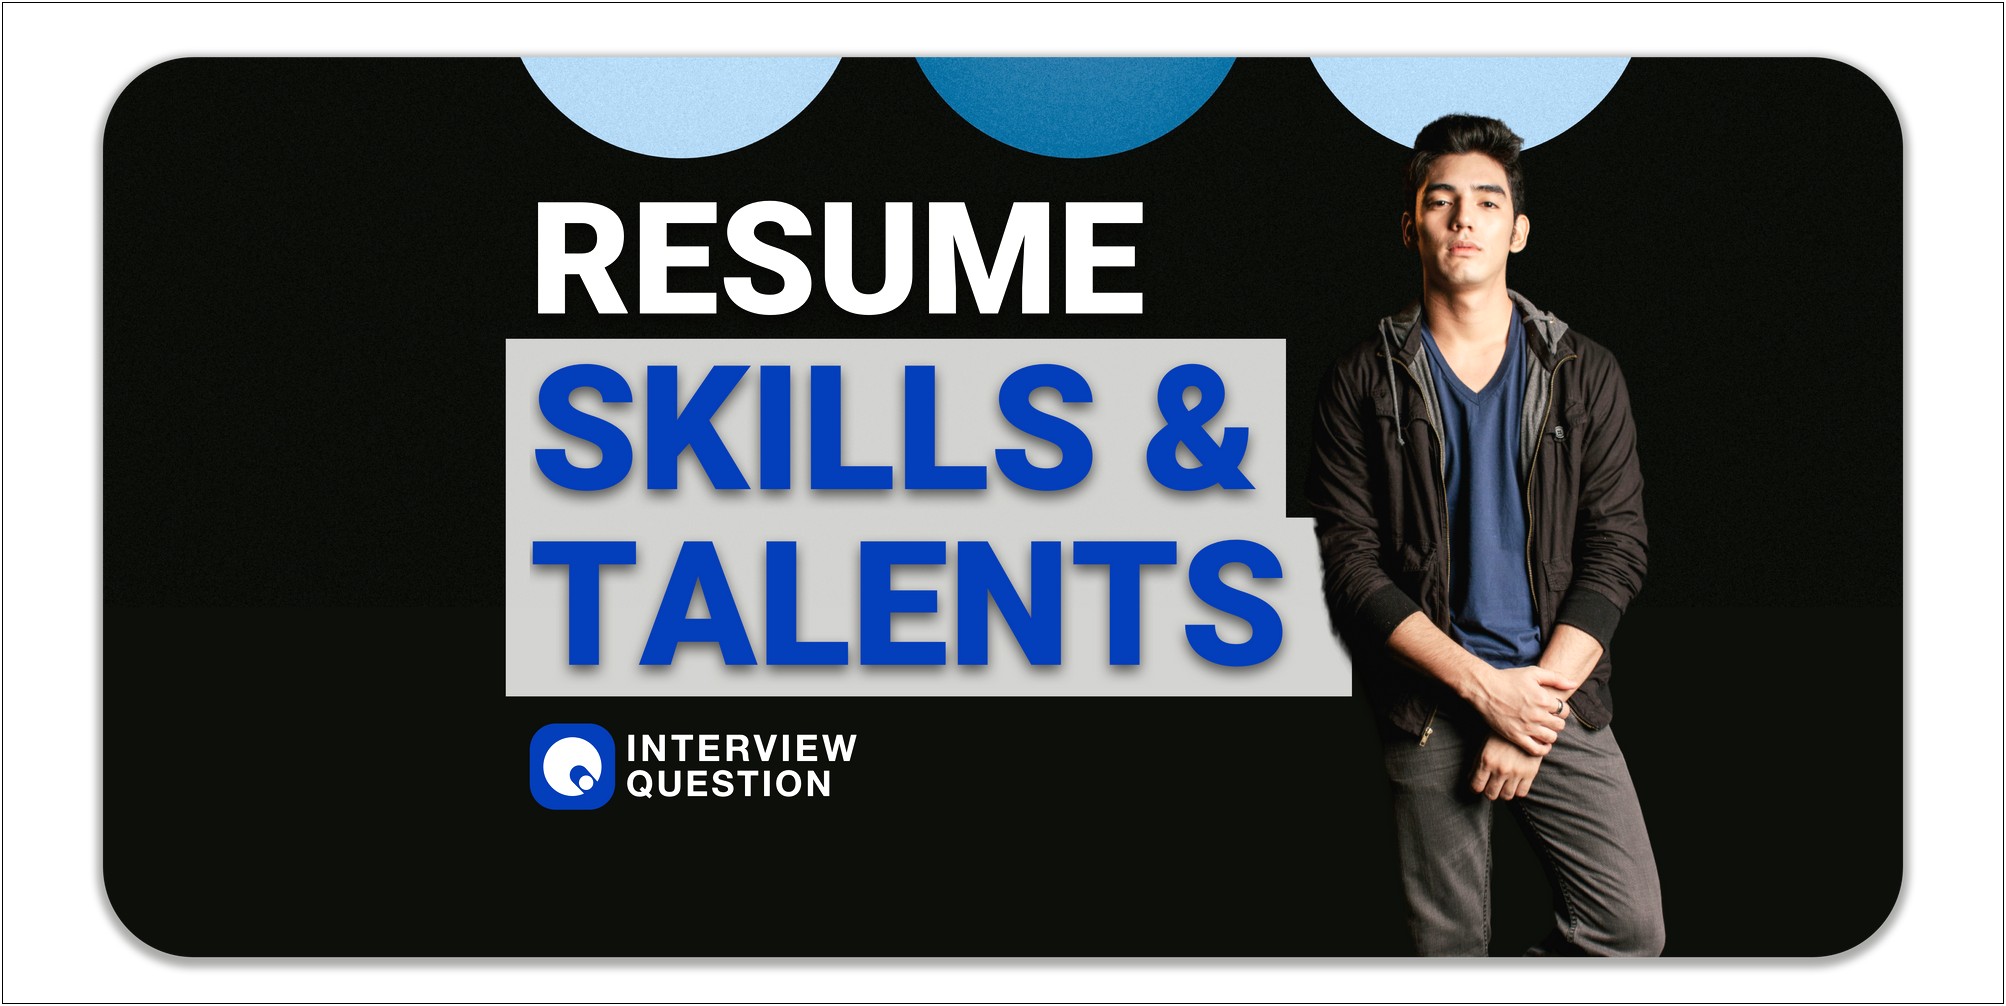 Special Skills And Talents For Resume